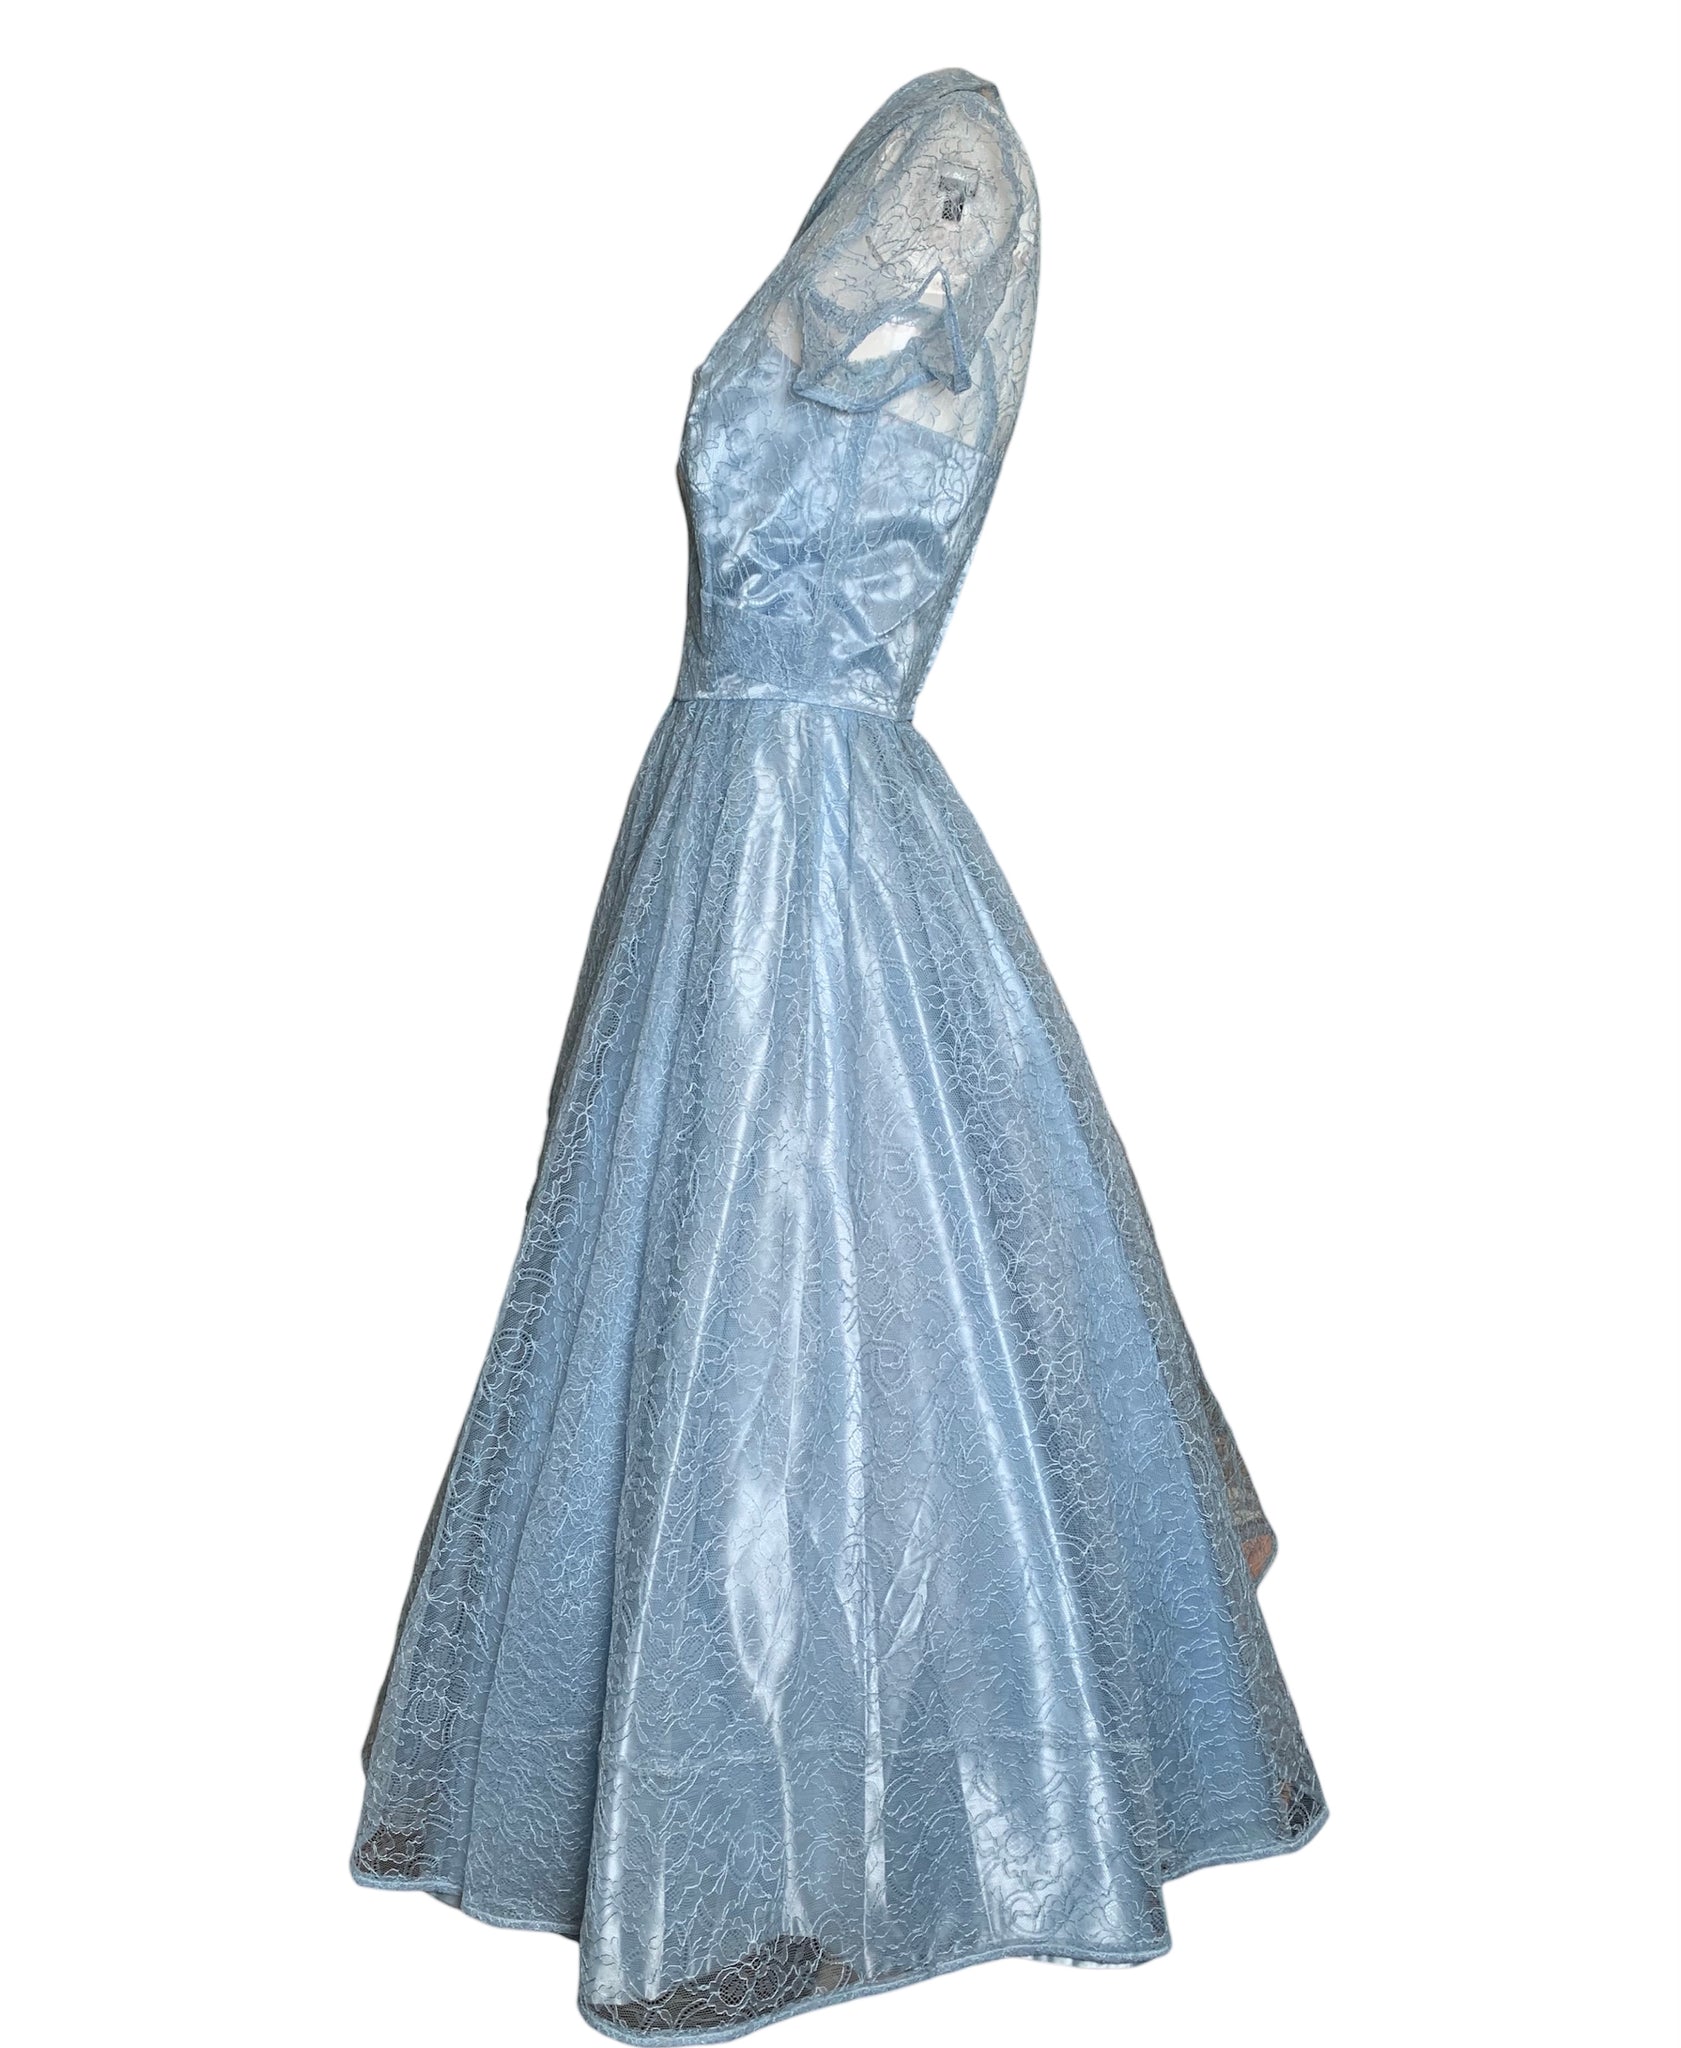  Ice Blue Lace and Satin Fit and Flare Party Dress SIDE 2 of 5